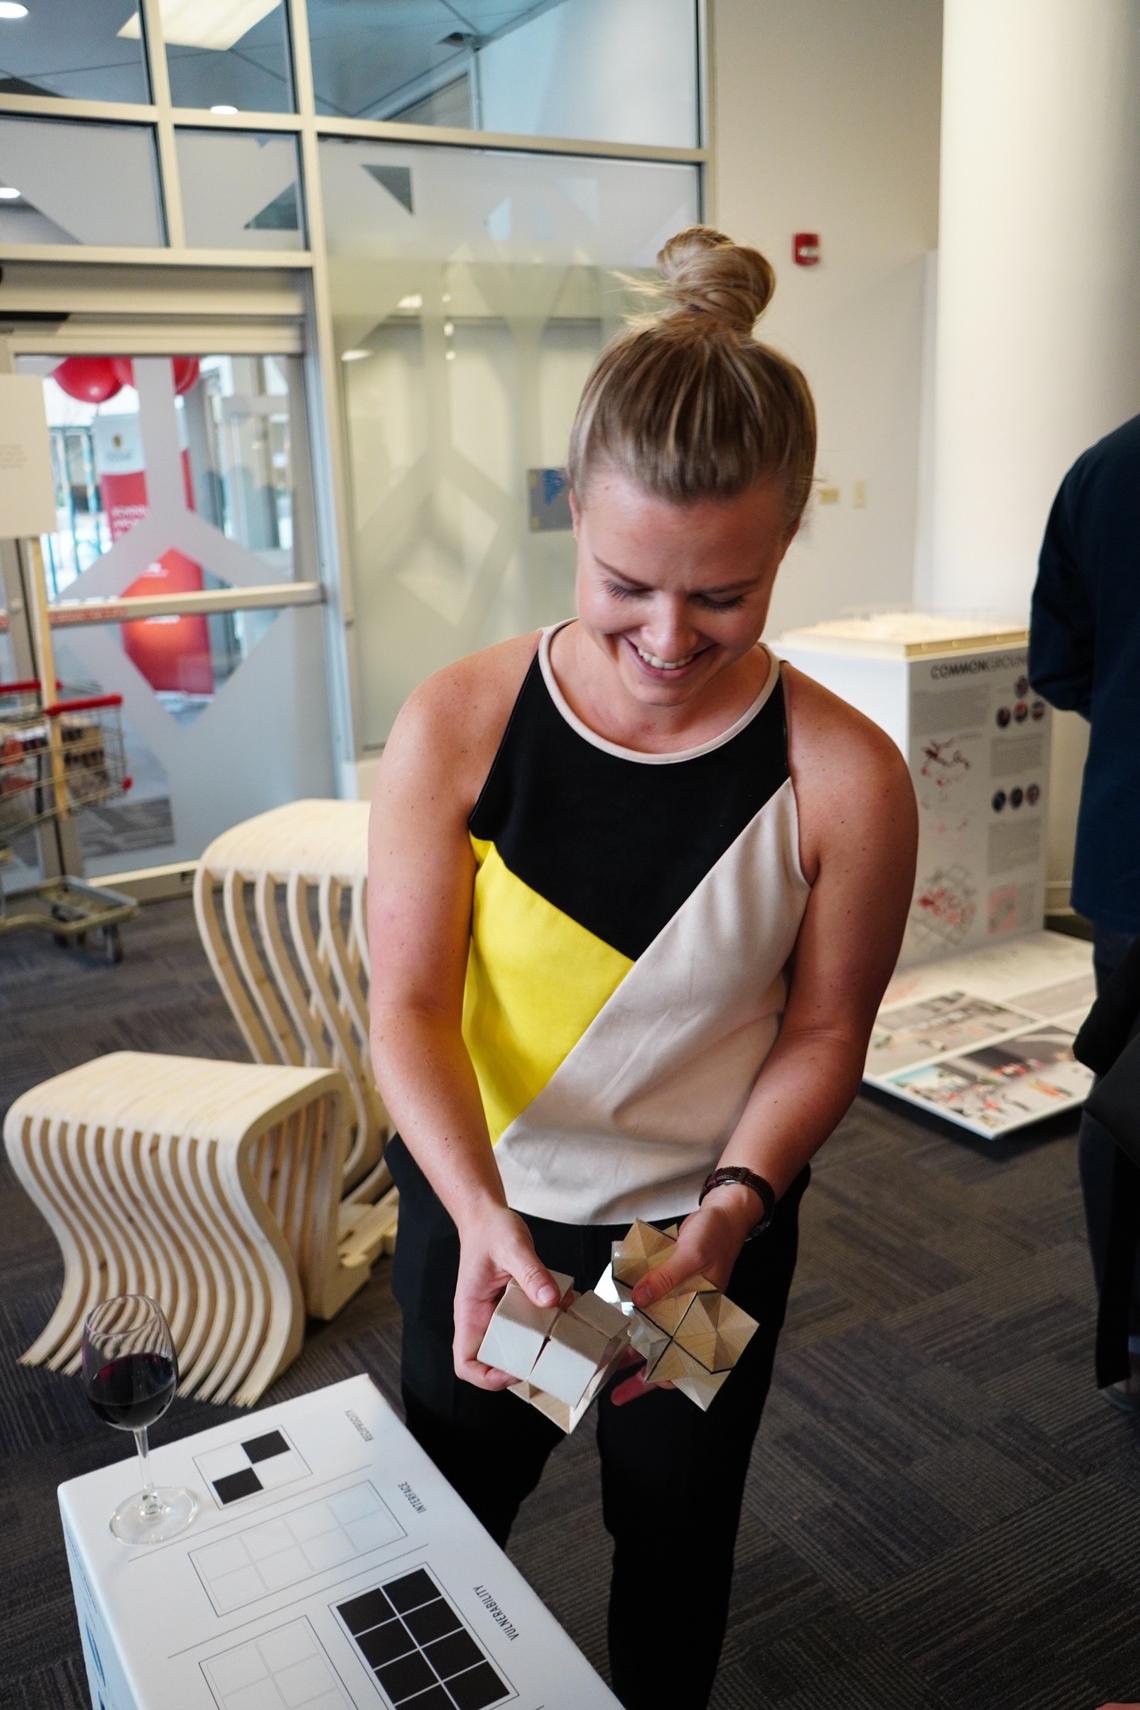 Ashley Ortlieb celebrates the completion of architecture school at the year-end show.